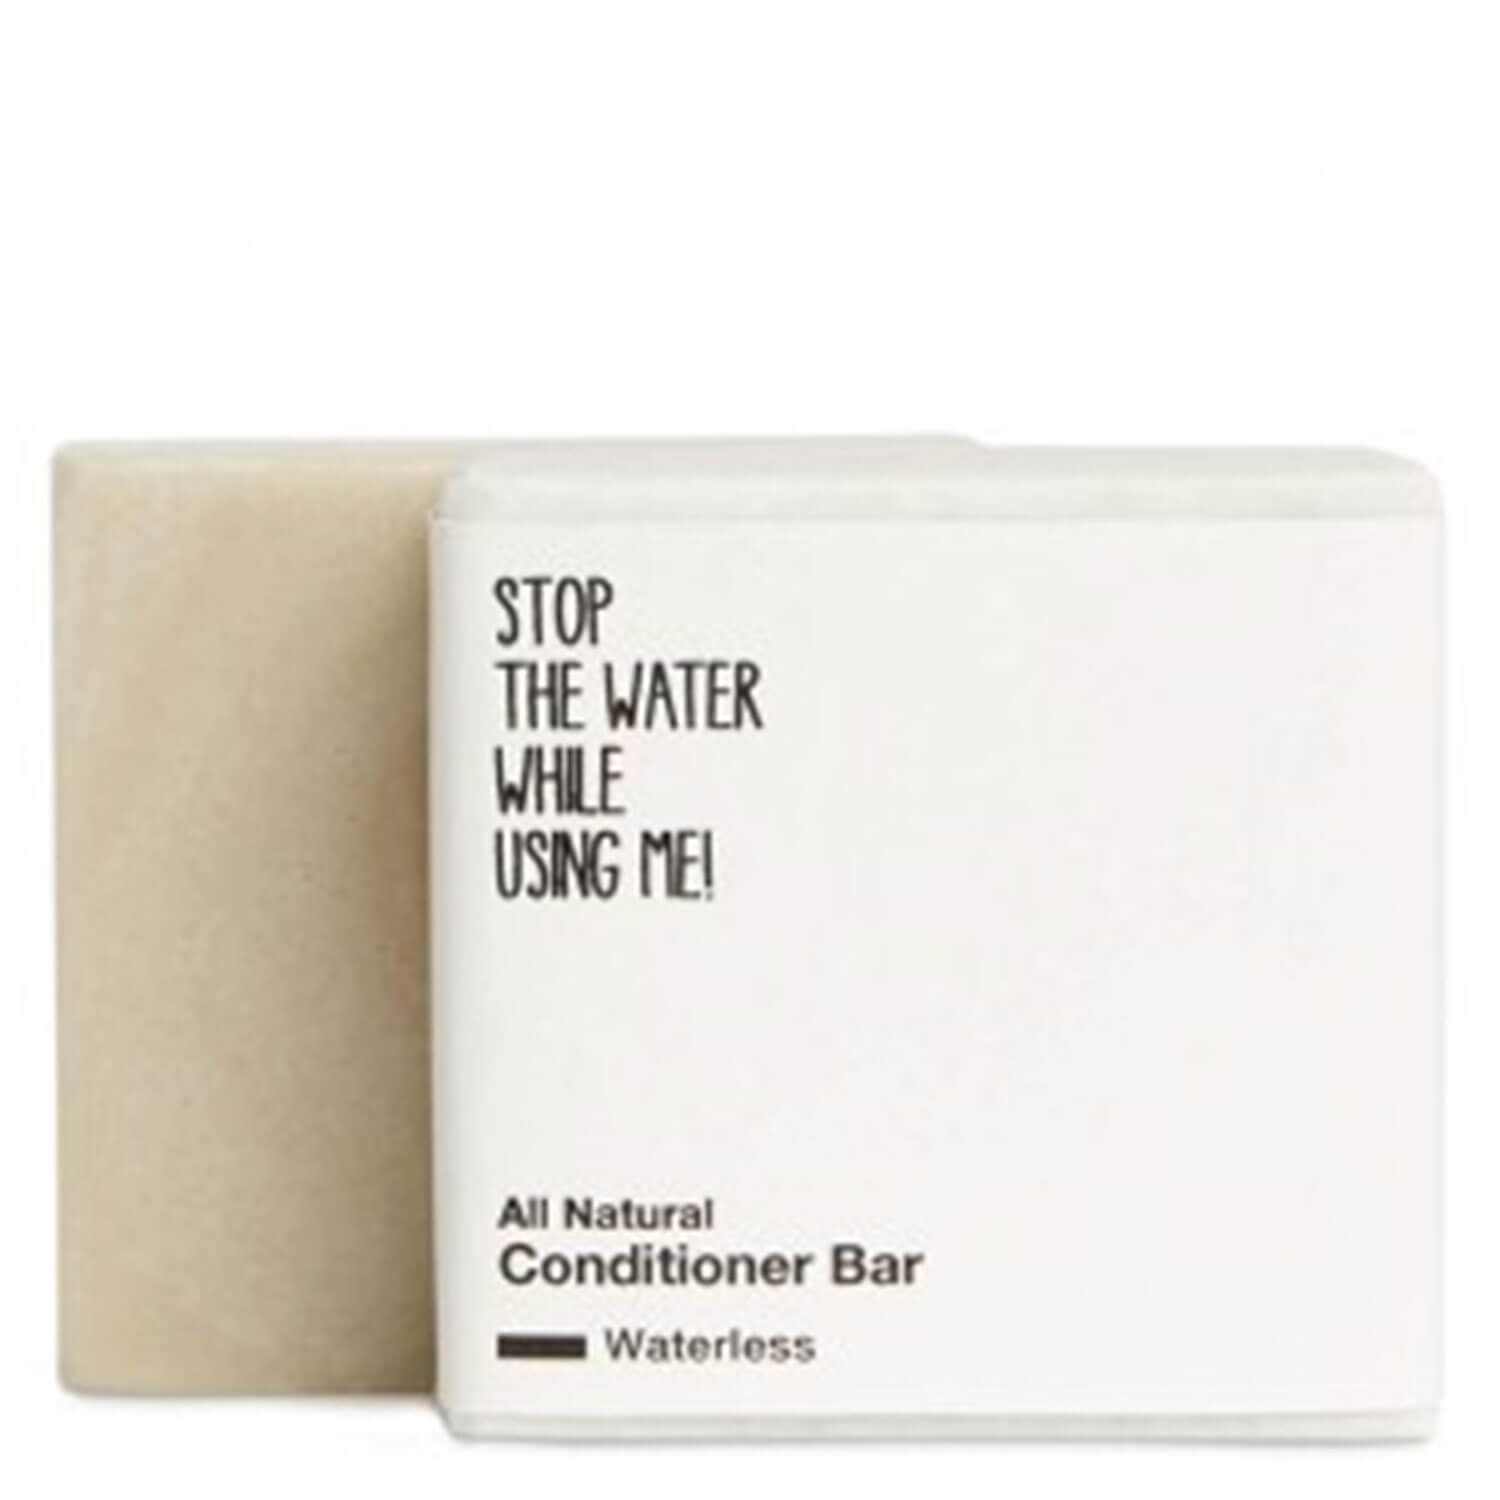 Product image from All Natural Hair - Waterless Conditioner Bar